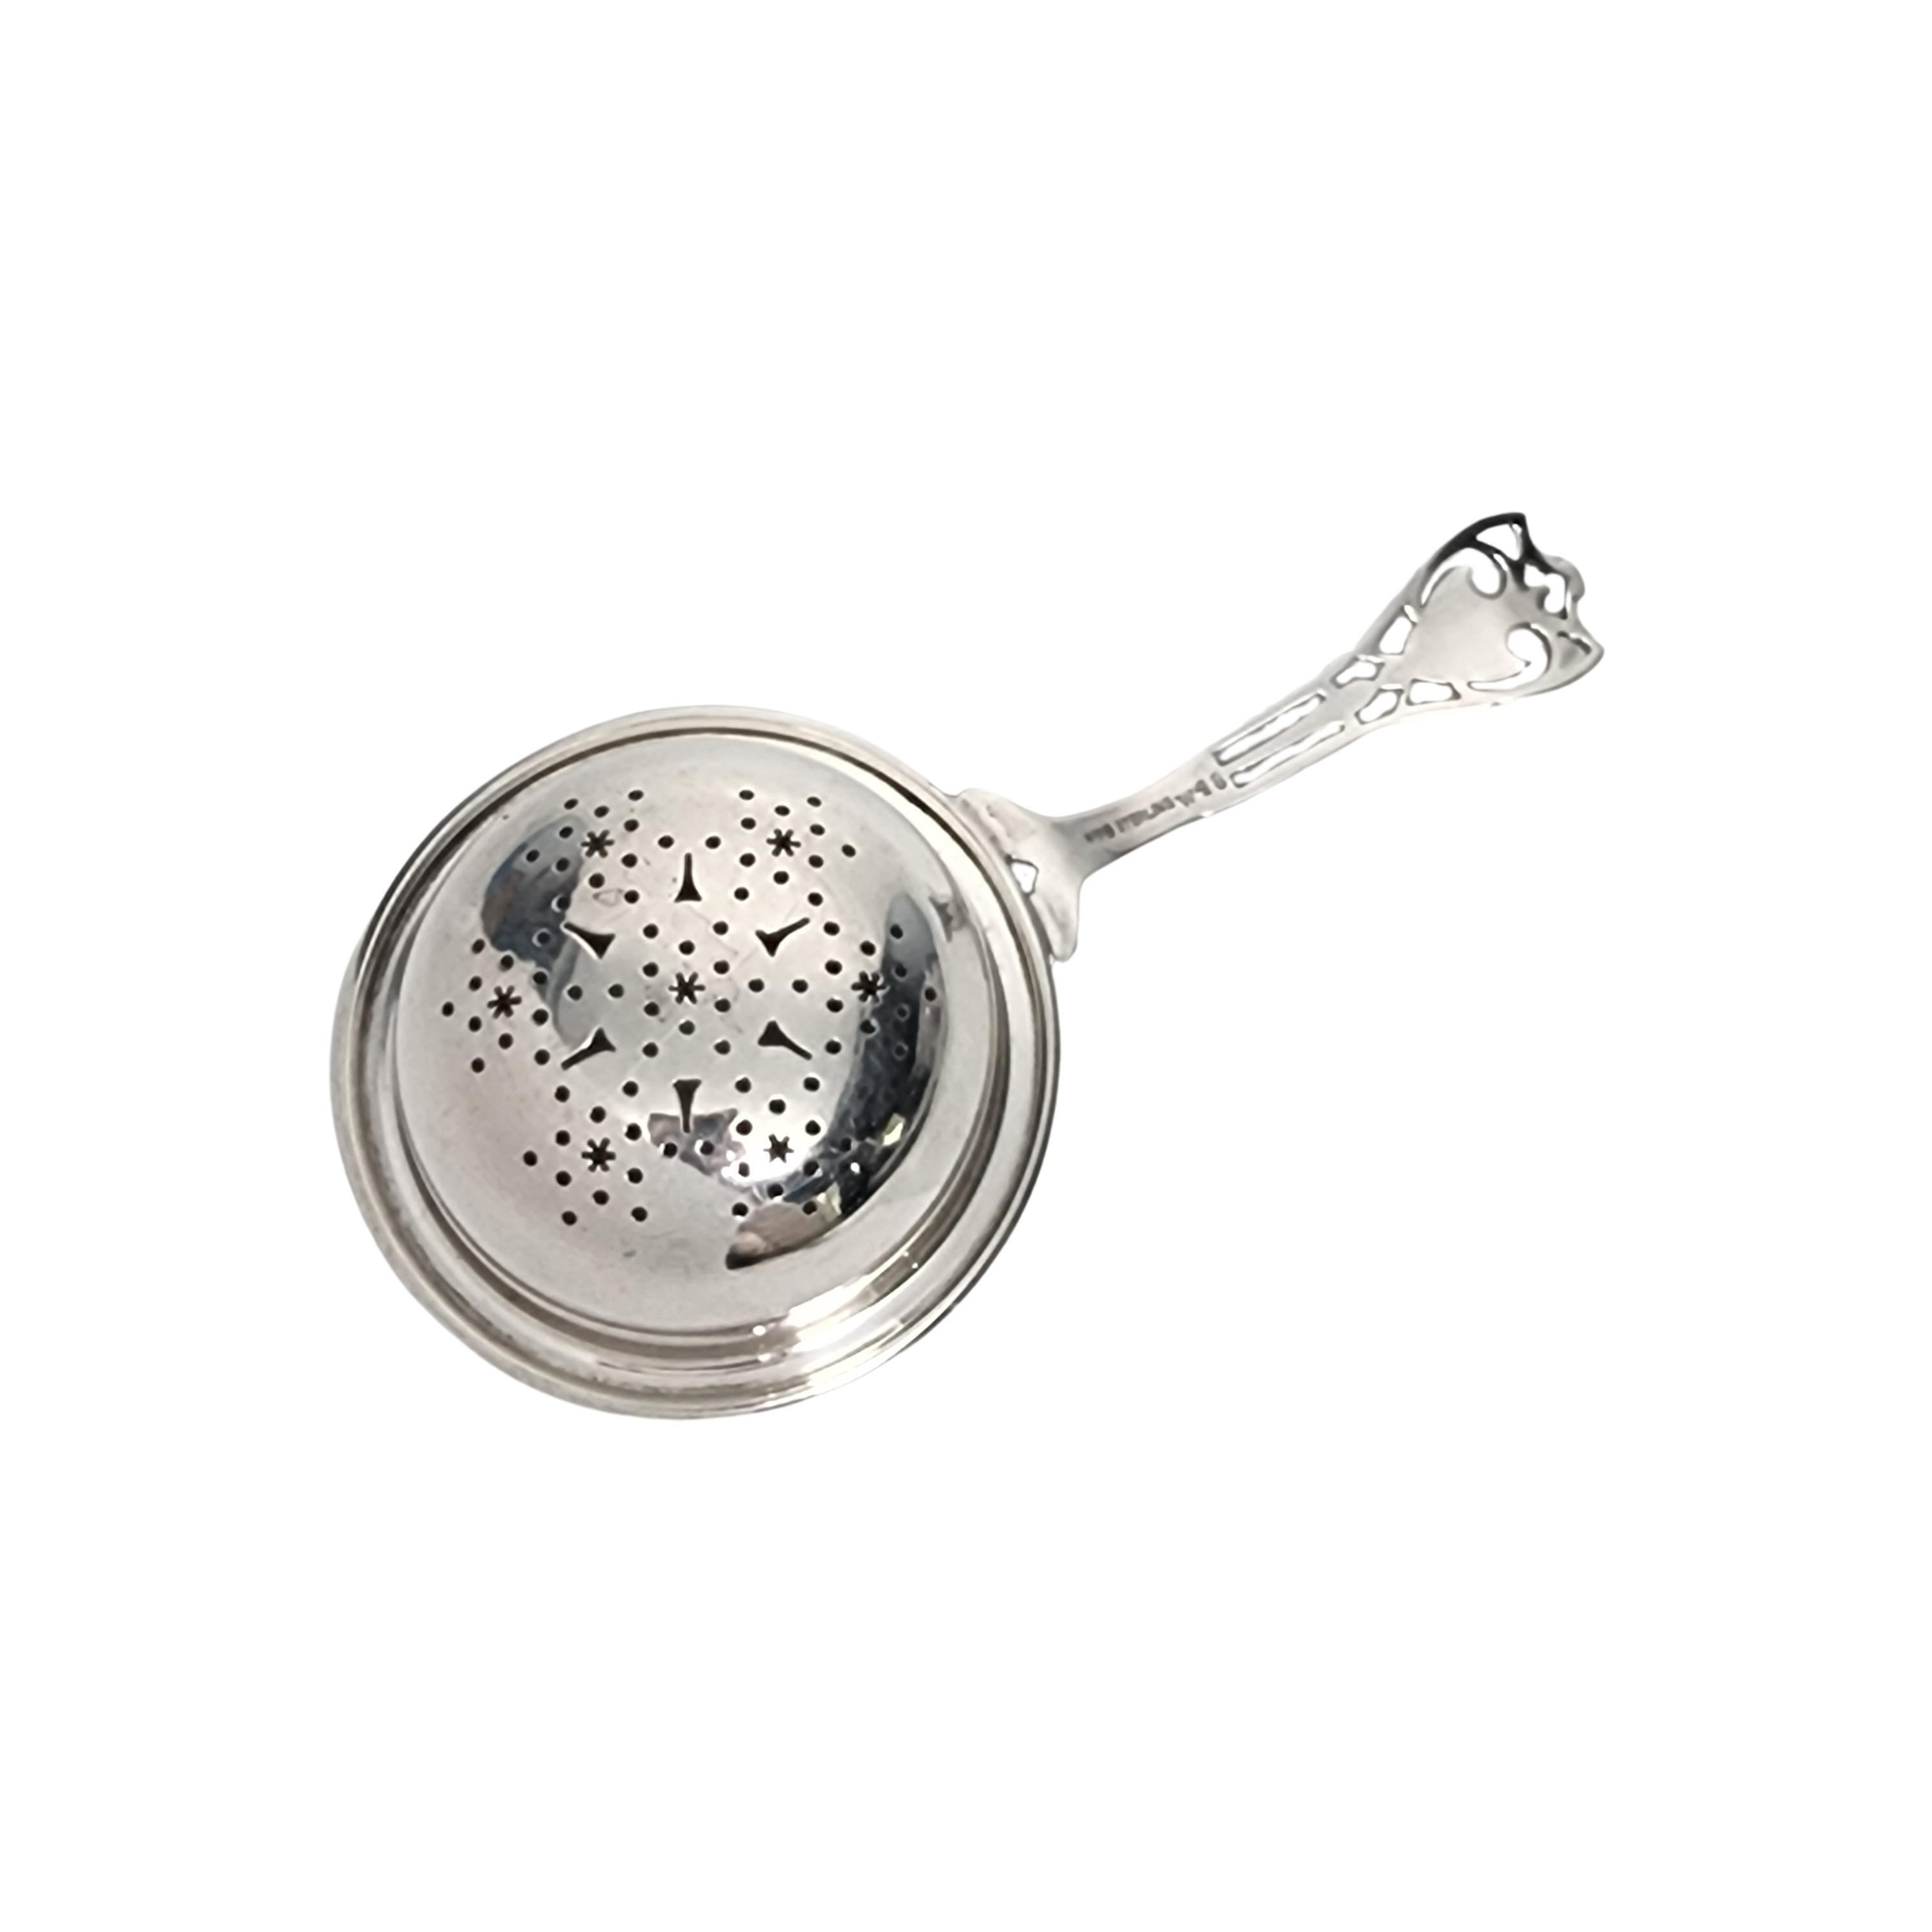 Vintage sterling silver tea strainer in the Putnam pattern by Watson #48.

Watson was active from 1880-1955 specializing in souvenir spoons, vanity and novelty items. This tea strainer features an open work design handle in the Putnam pattern, and a